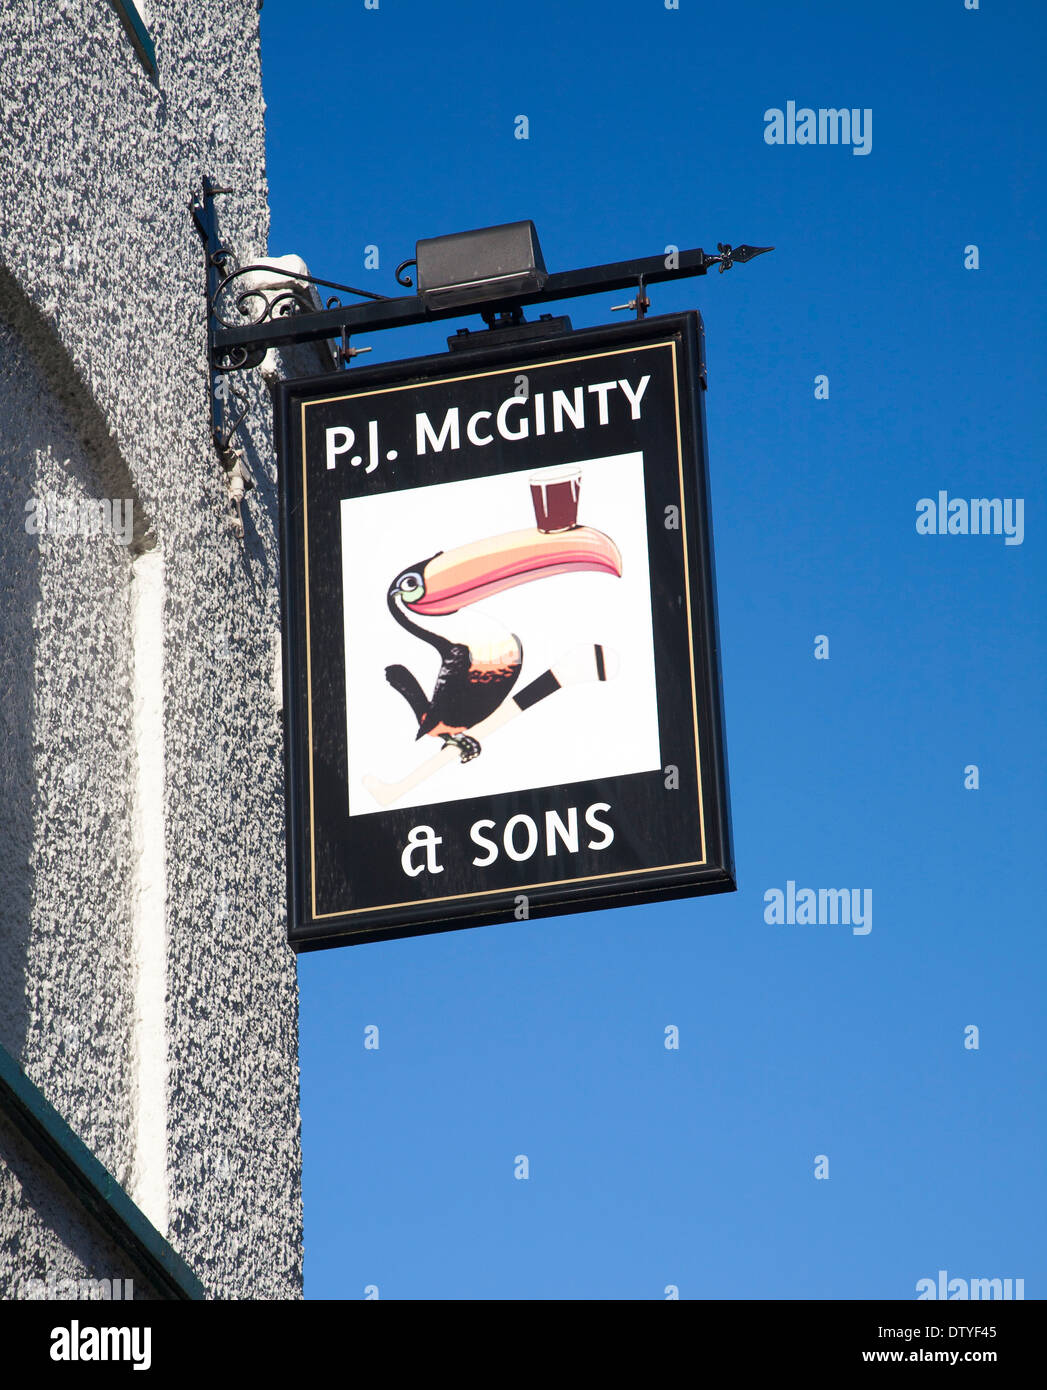 P.J McGinty Irish pub with toucan bird Guinness sign against blue sky, Ipswich, Suffolk, England Stock Photo